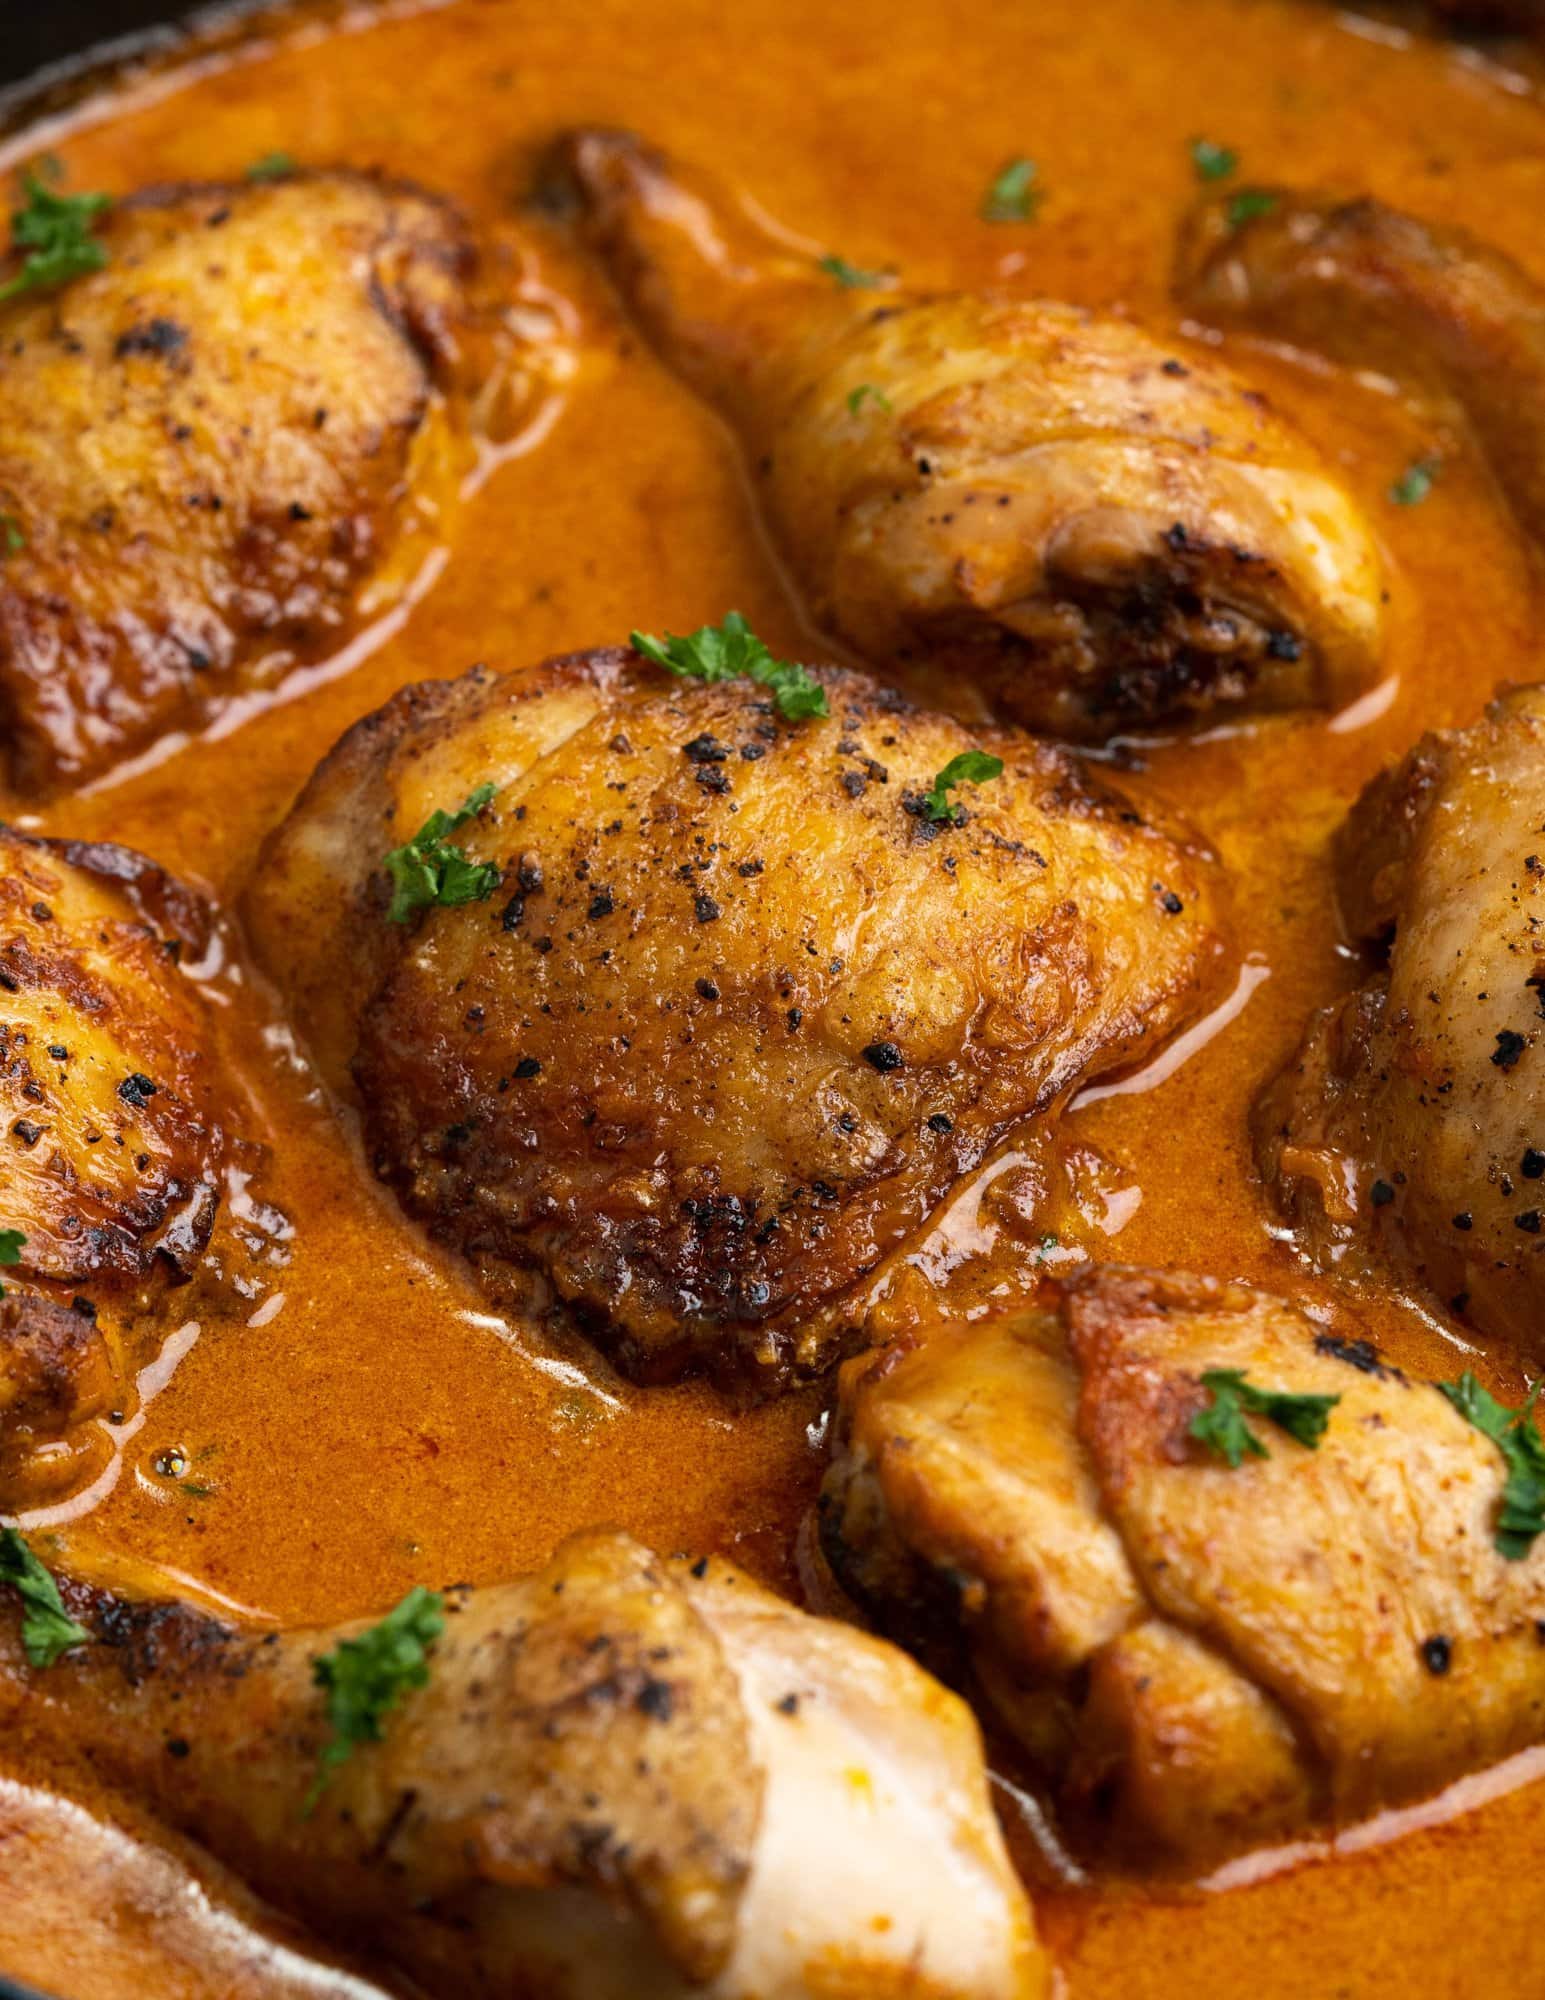 Chicken Paprikash is a Hungarian stew made with browned chicken pieces braised in a rich, flavourful and creamy paprika sauce.